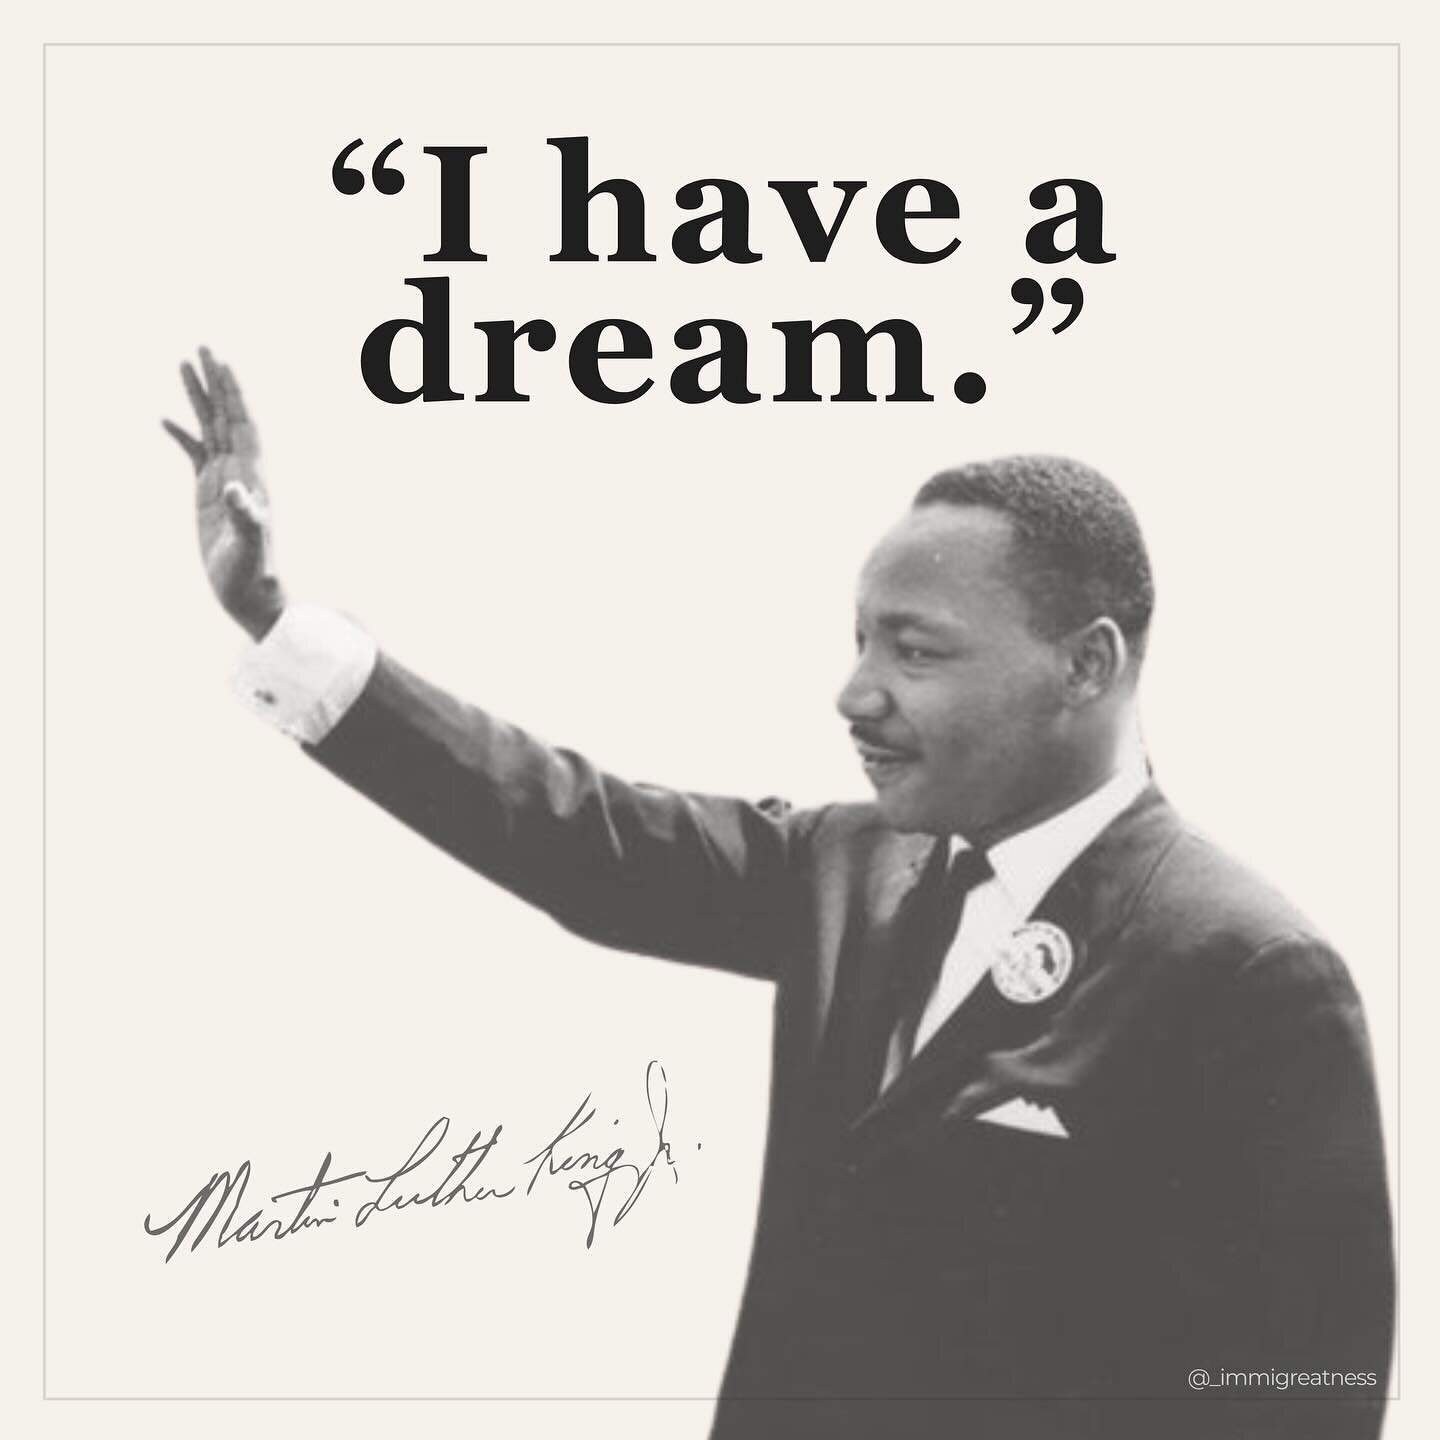 It&rsquo;s MLK day! ⭐️

Martin Luther King Jr. Day is observed to honor the life and achievements of Martin Luther King Jr., a prominent leader in the American civil rights movement. It is a day to reflect on his contributions to the fight against ra